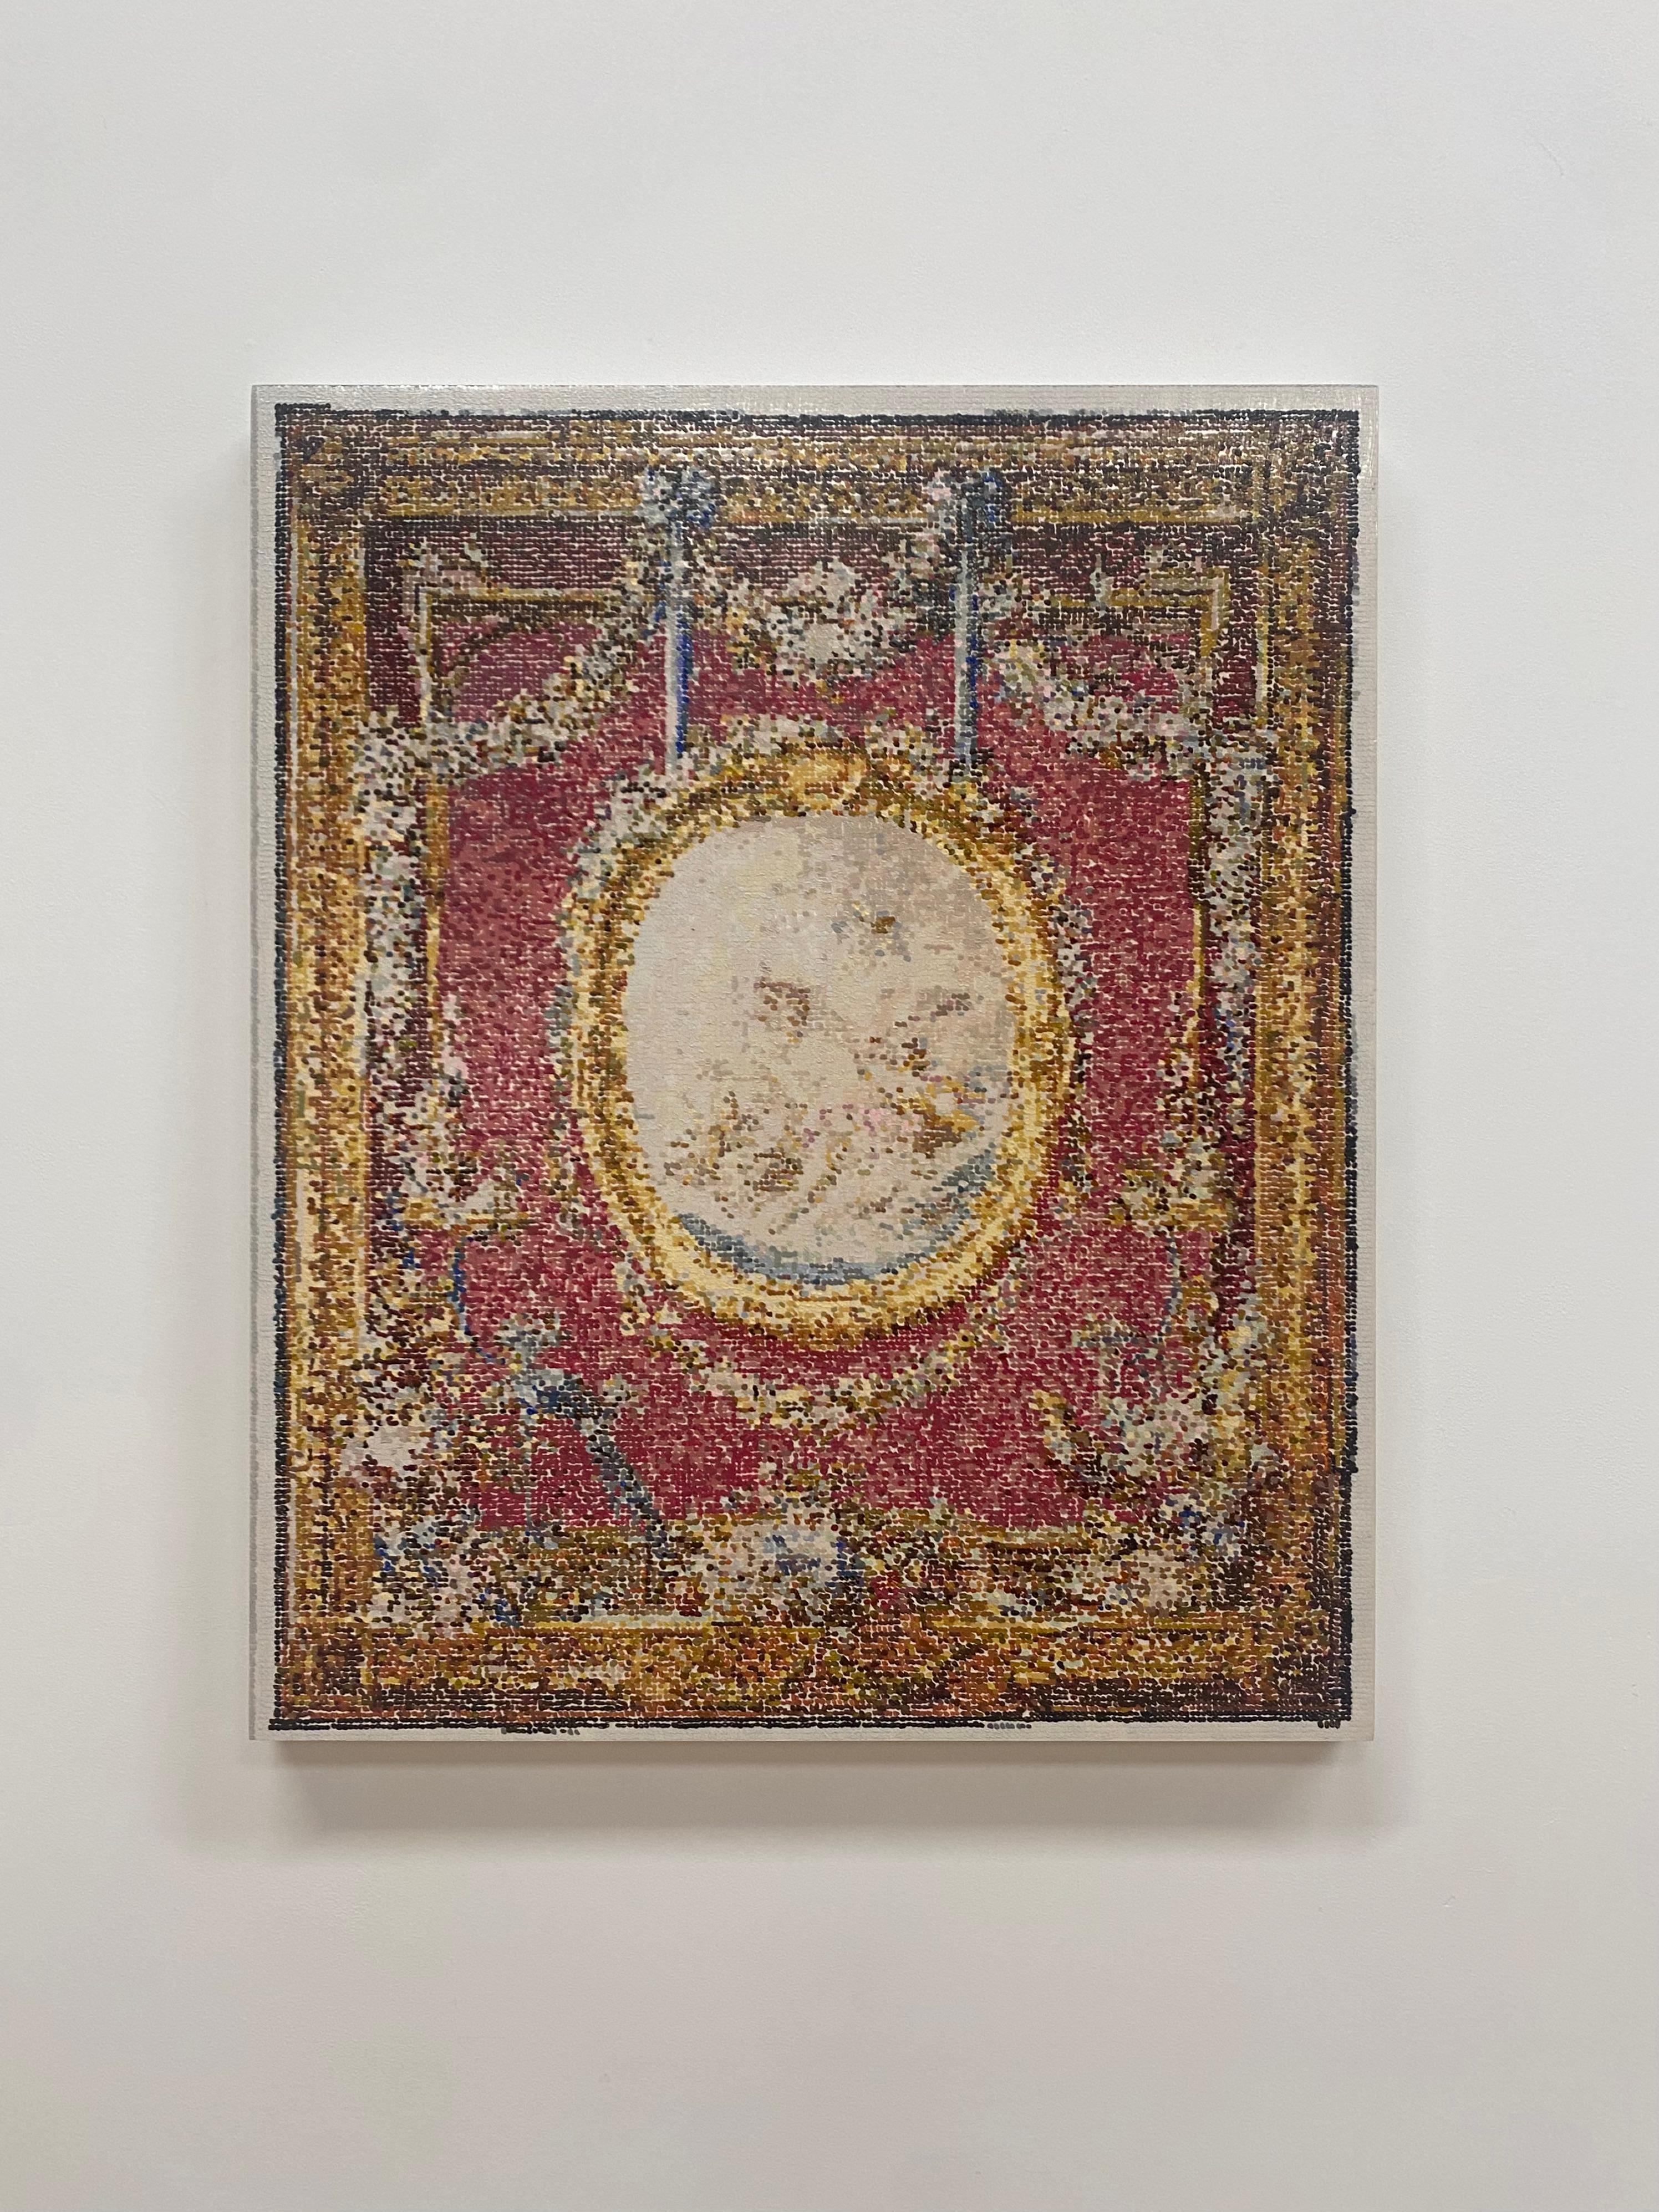 In this painted embroidery, an ornate french tapestry in brick red, gold and ivory with royal blue details on is carefully painted in colorful dots in acrylic and gouache on Duralar mounted on panel. Signed and dated on verso.

Kirstin Lamb’s